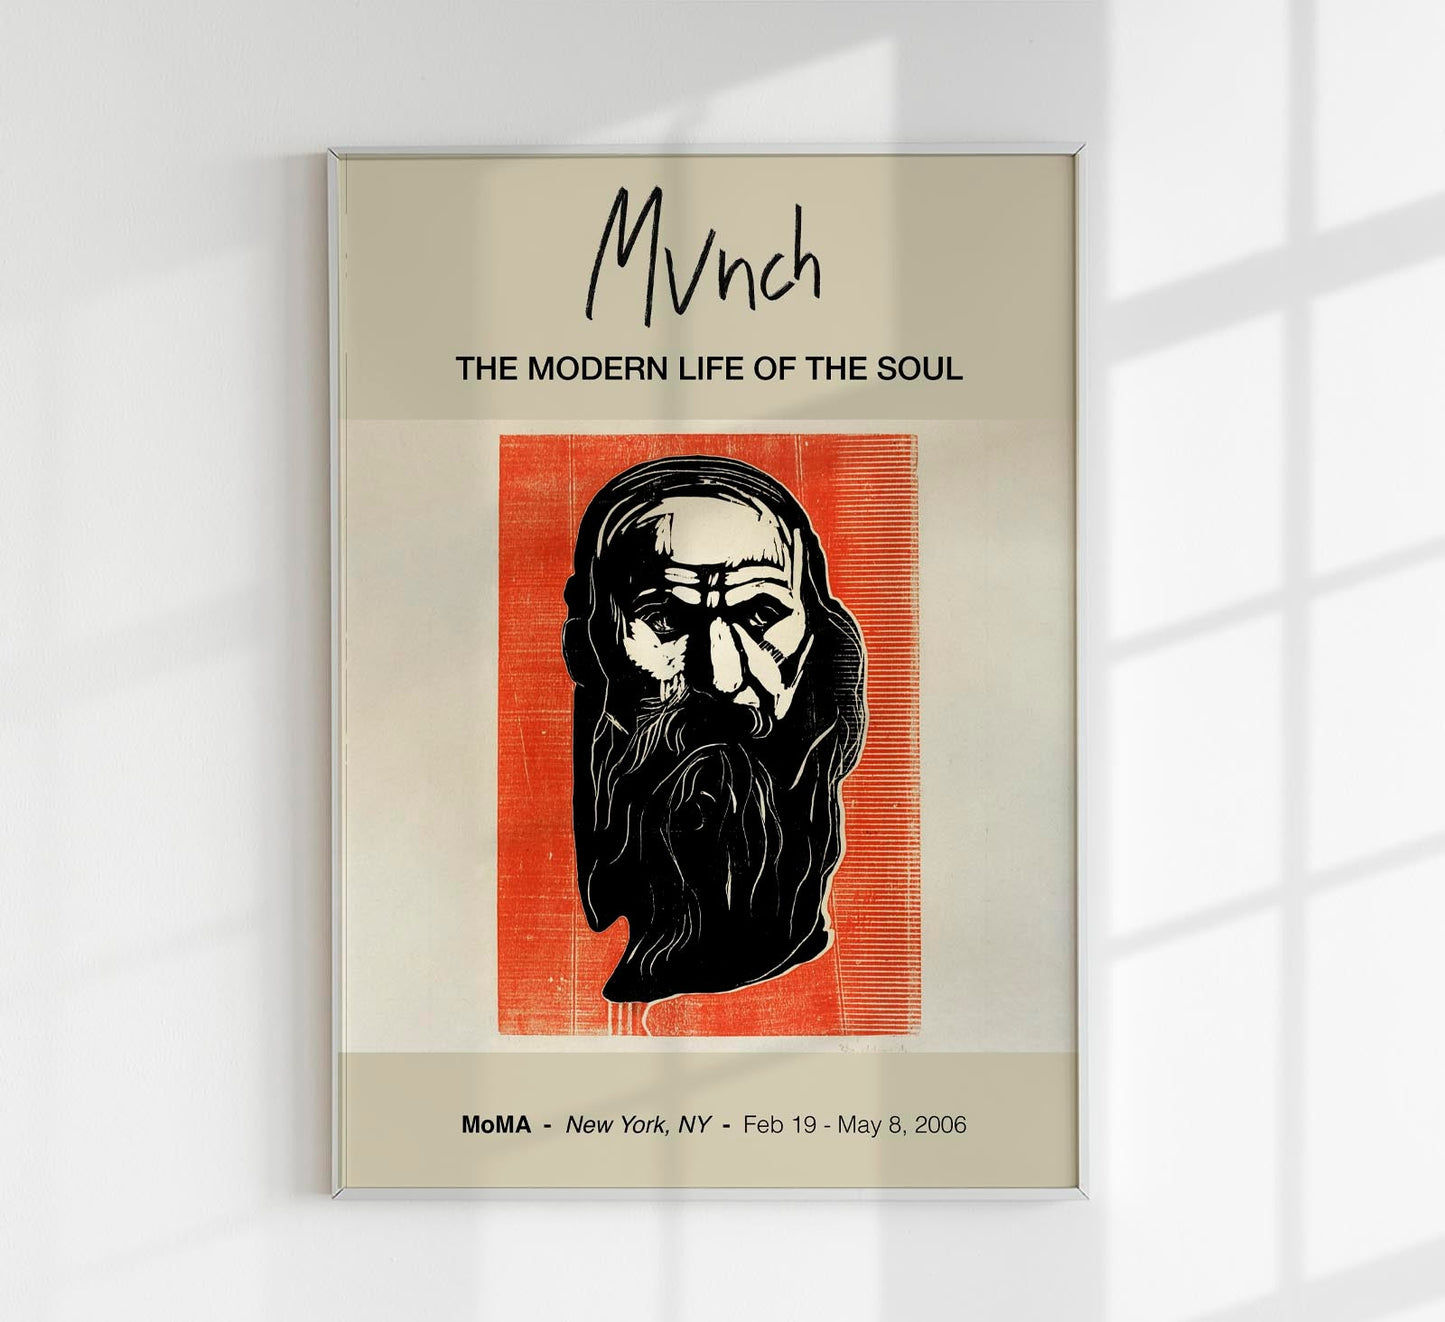 Head of an Old Man with Beard Munch Exhibition Poster